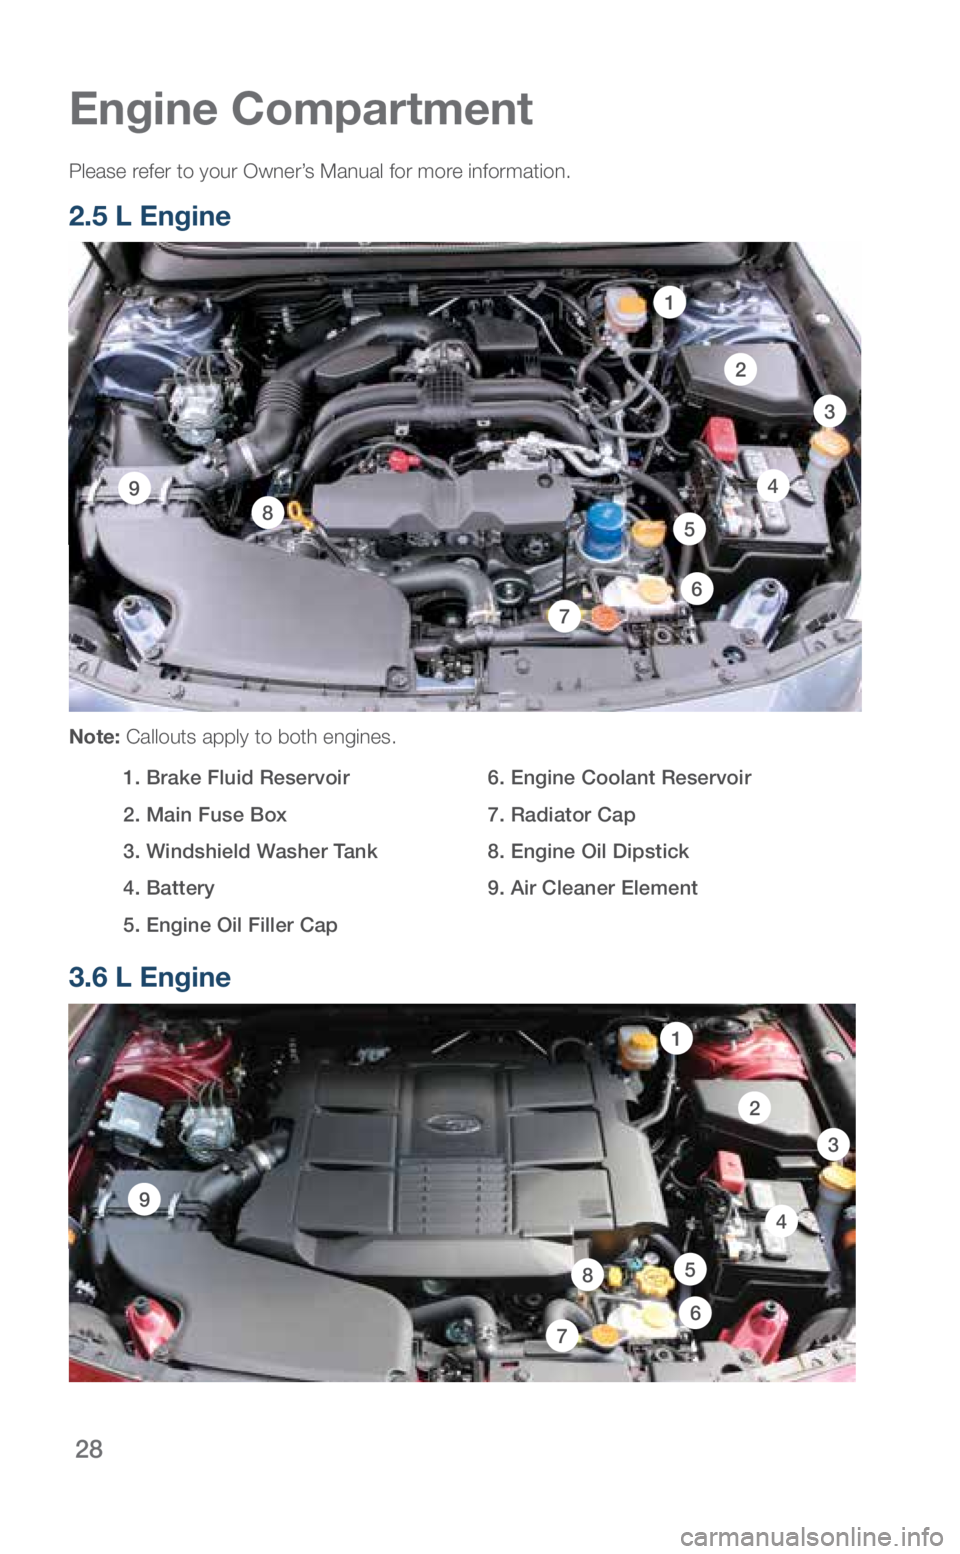 SUBARU LEGACY 2018  Quick Guide 28
2
3
7
1
85
49
6
Engine Compartment
Please refer to your Owner’s Manual for more information. 
2.5 L Engine
 
Note: Callouts apply to both engines.
 1.  Brake Fluid Reservoir
  2. Main Fuse Box 
 